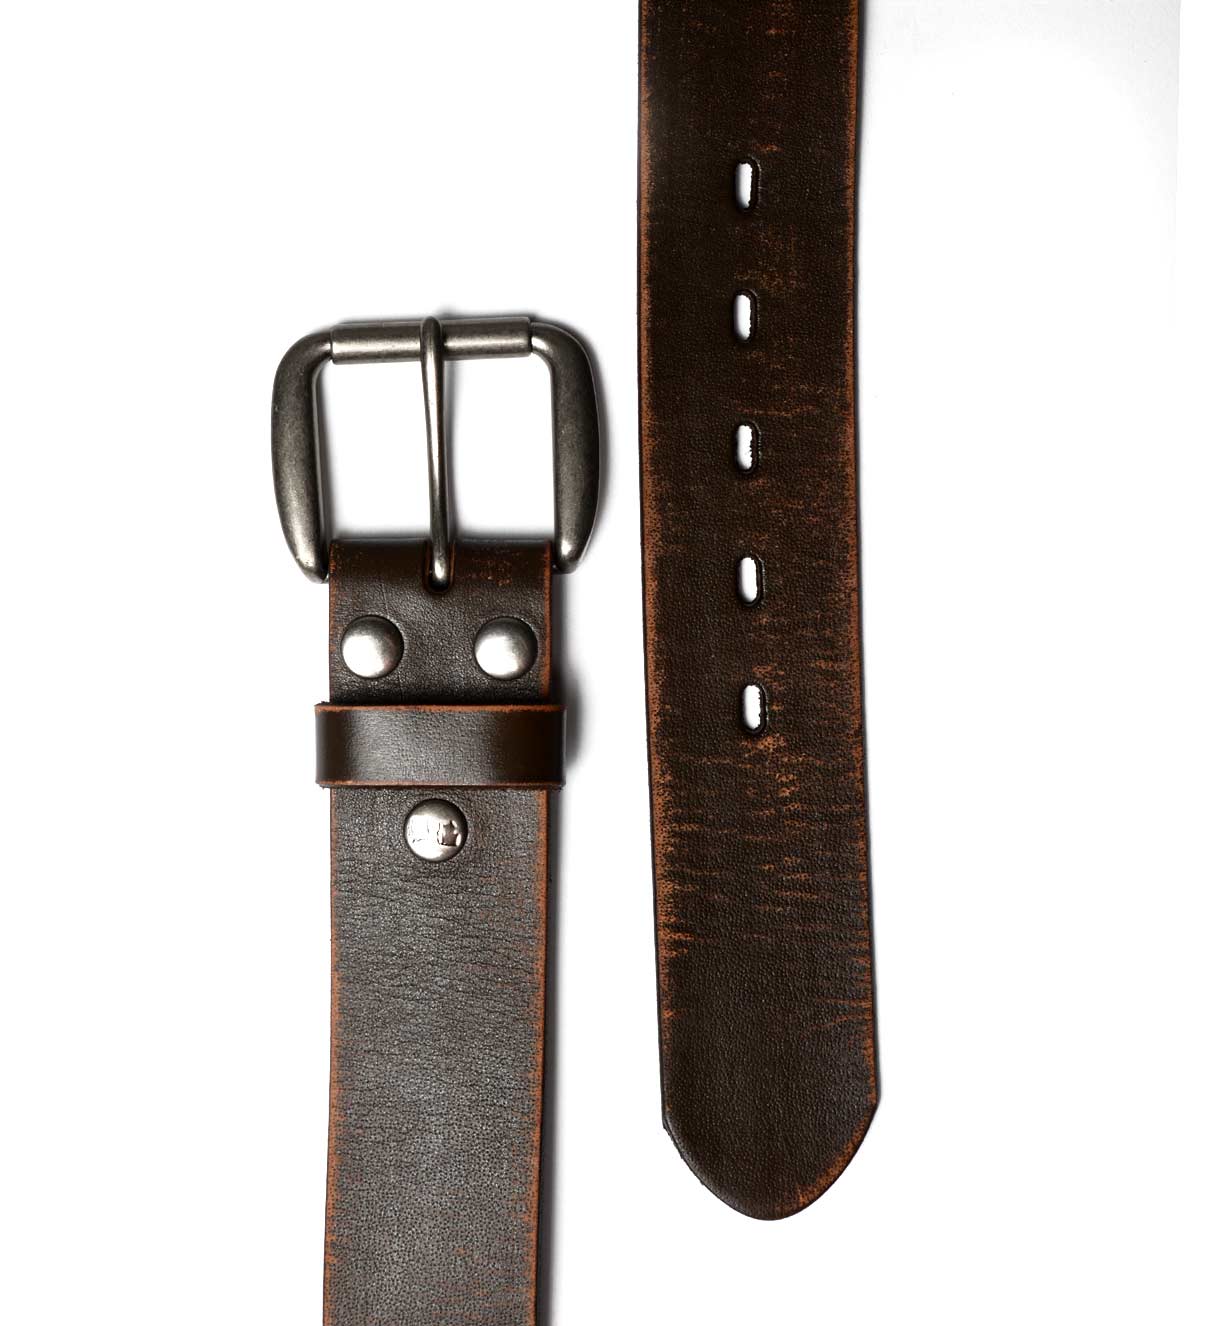 A Hobo brown leather belt with a metal buckle from Bed Stu.